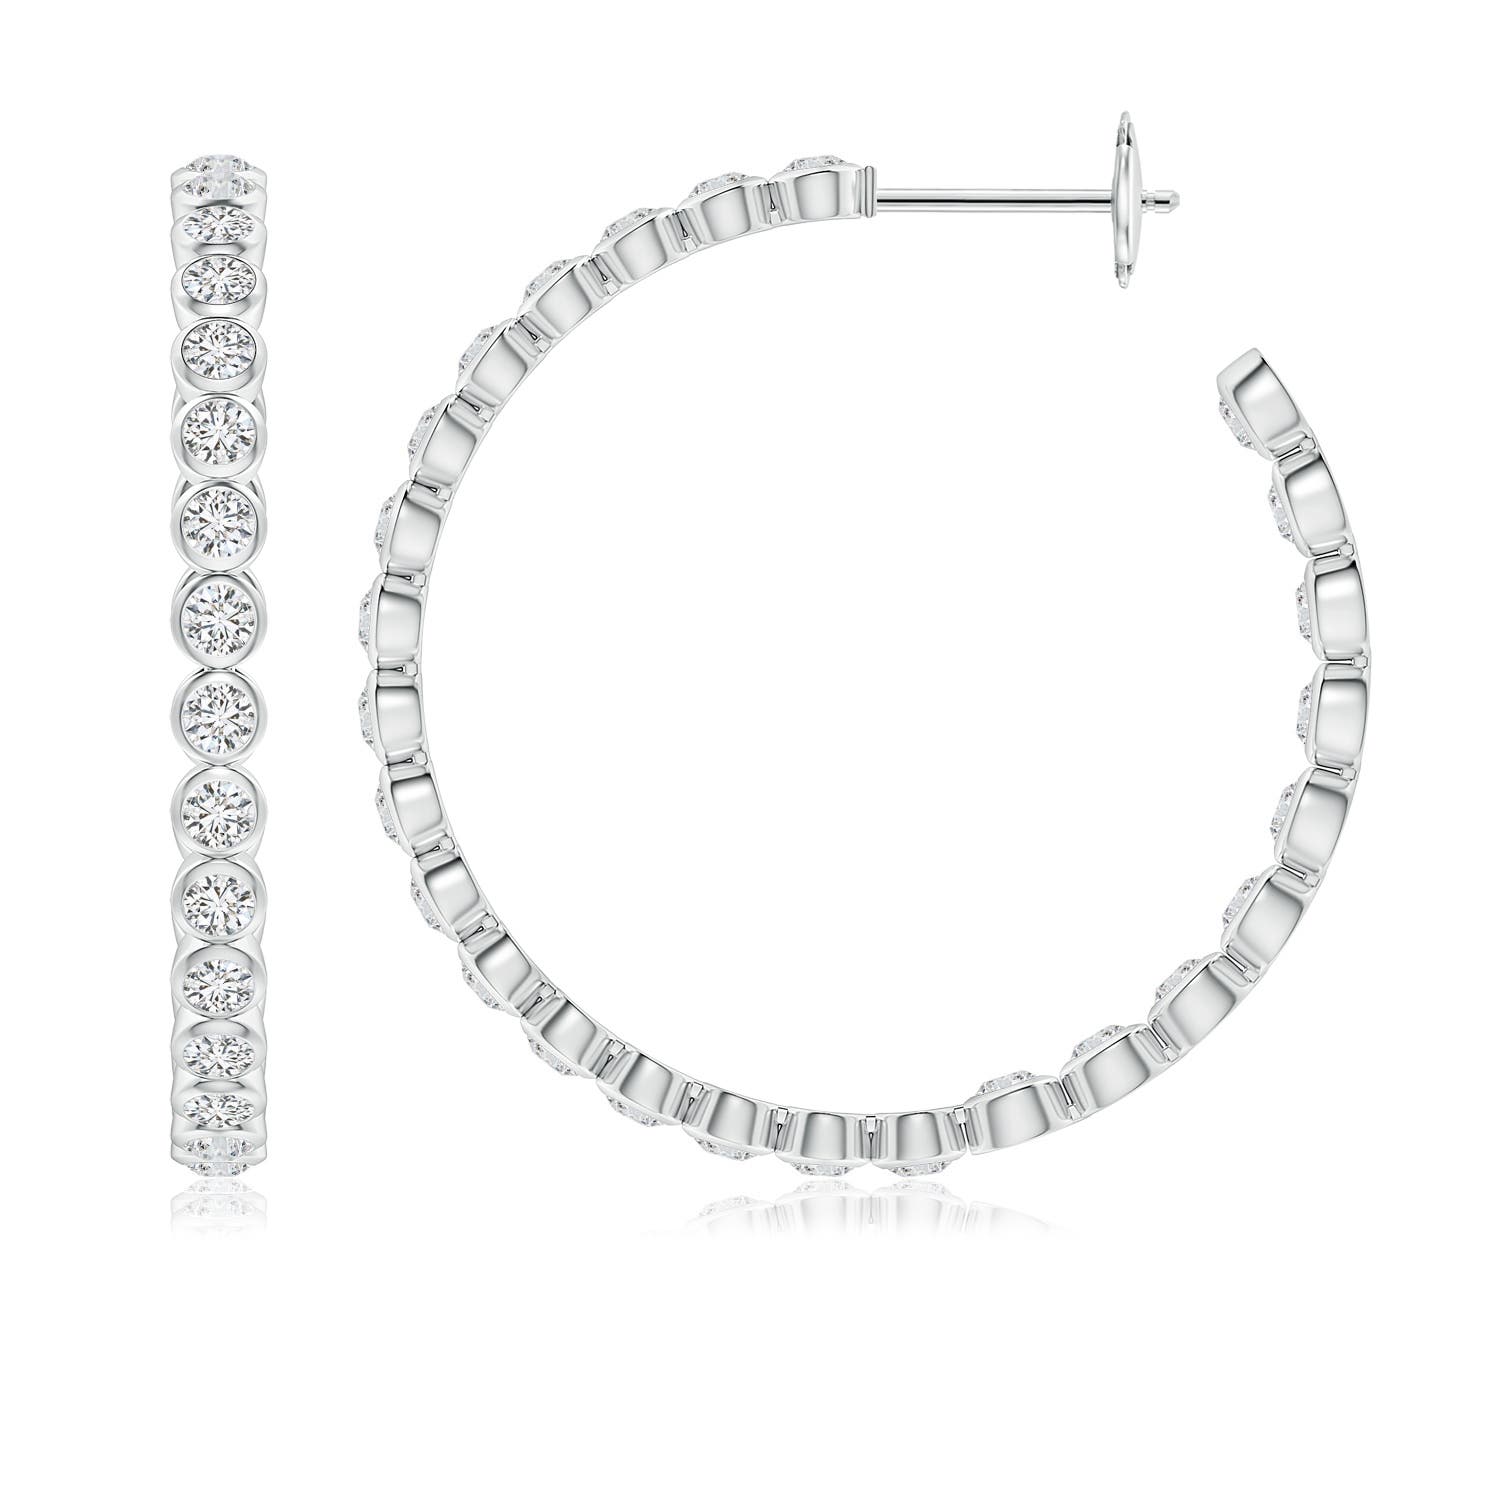 H, SI2 / 2.18 CT / 14 KT White Gold